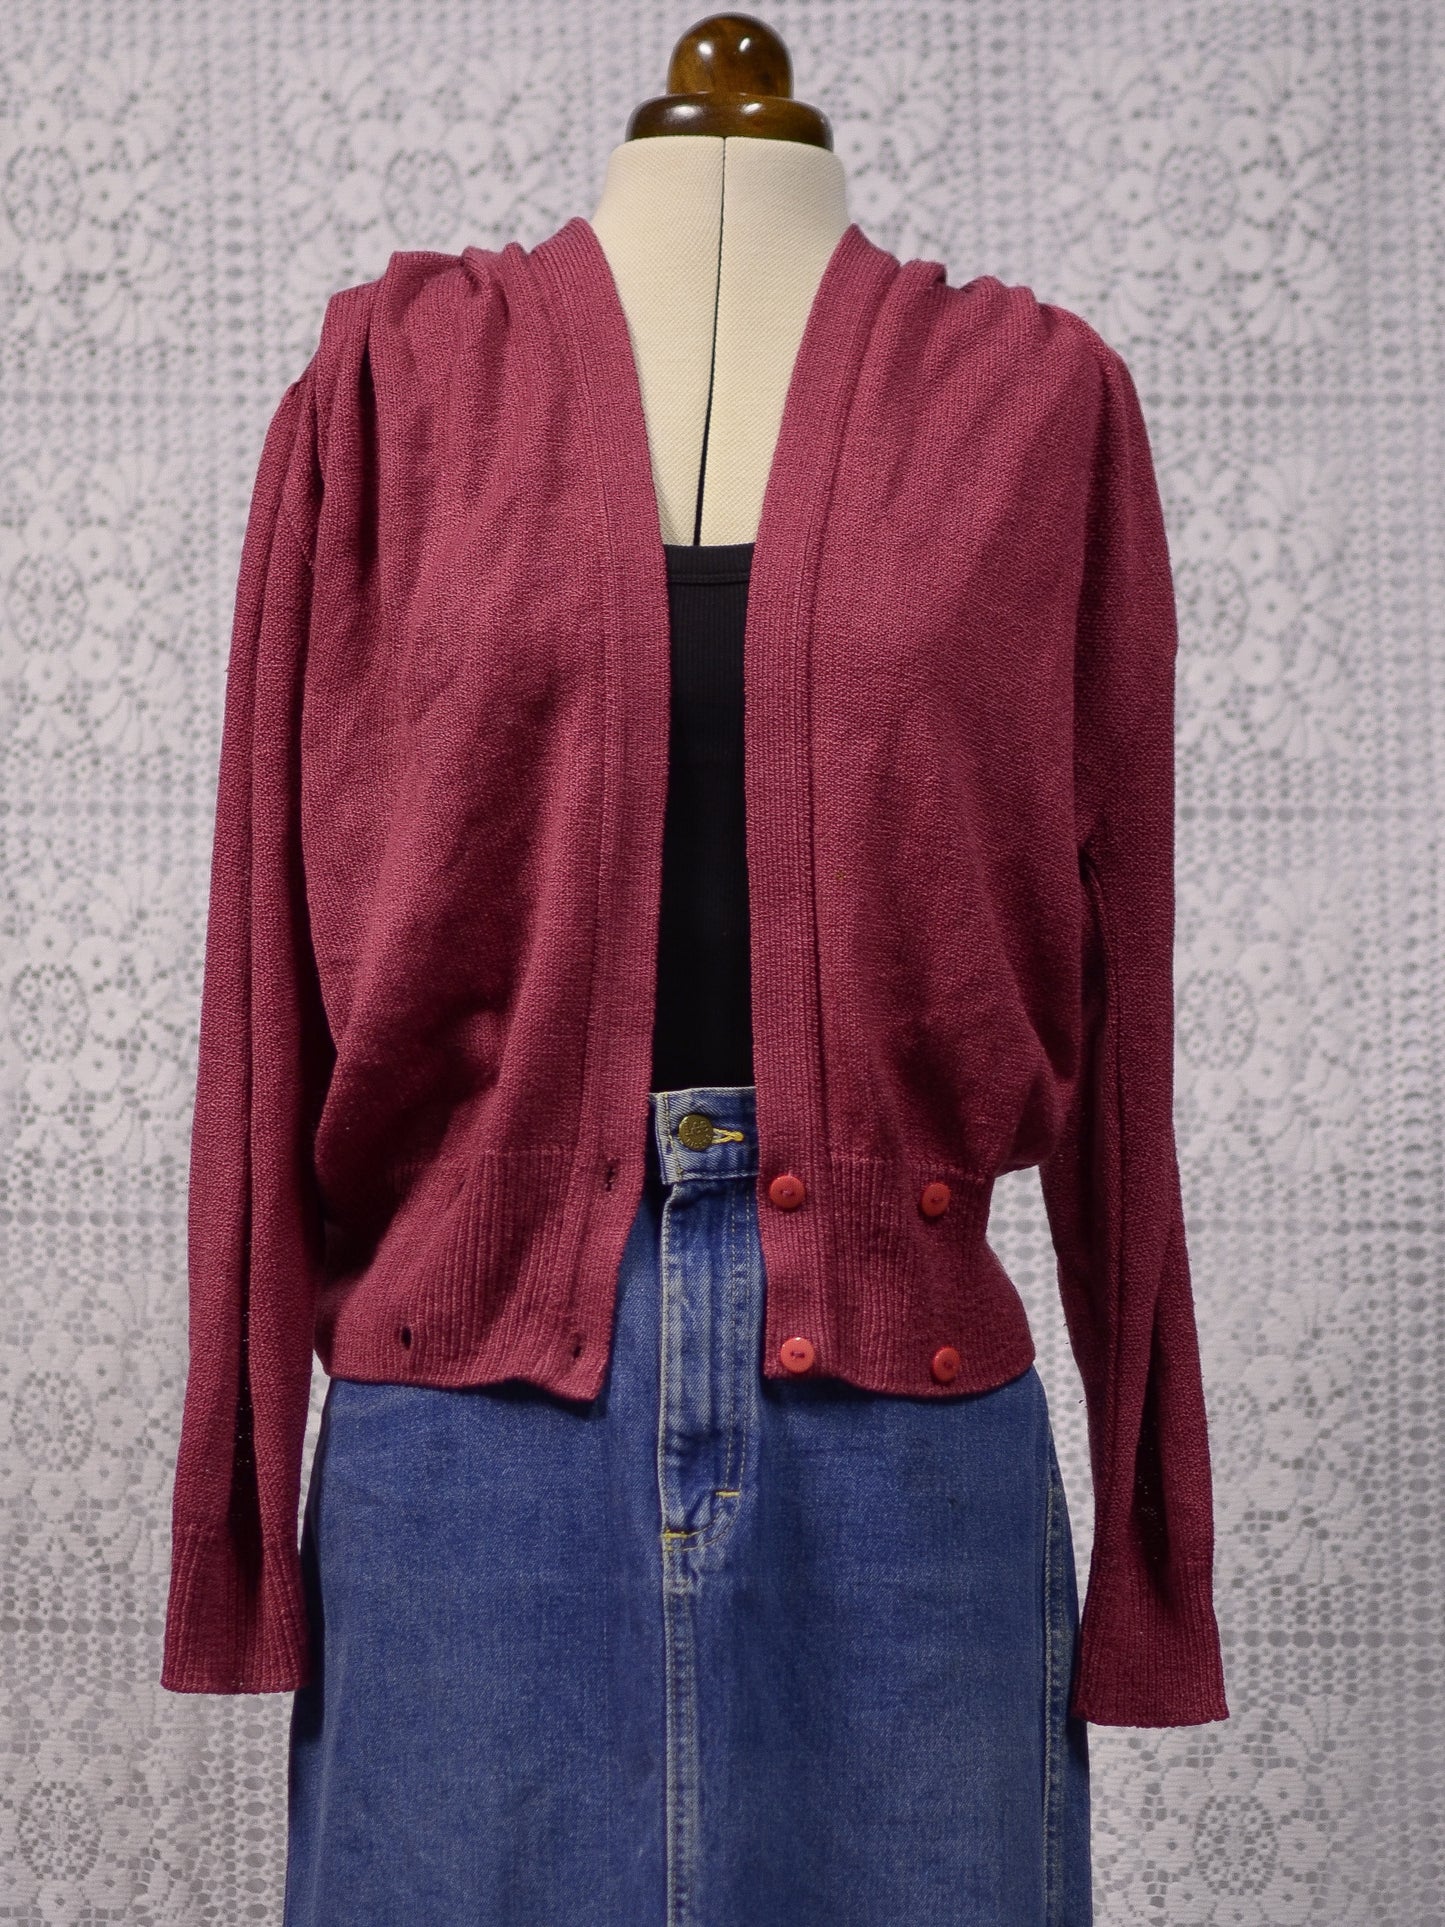 1980s dark pink double breasted cardigan